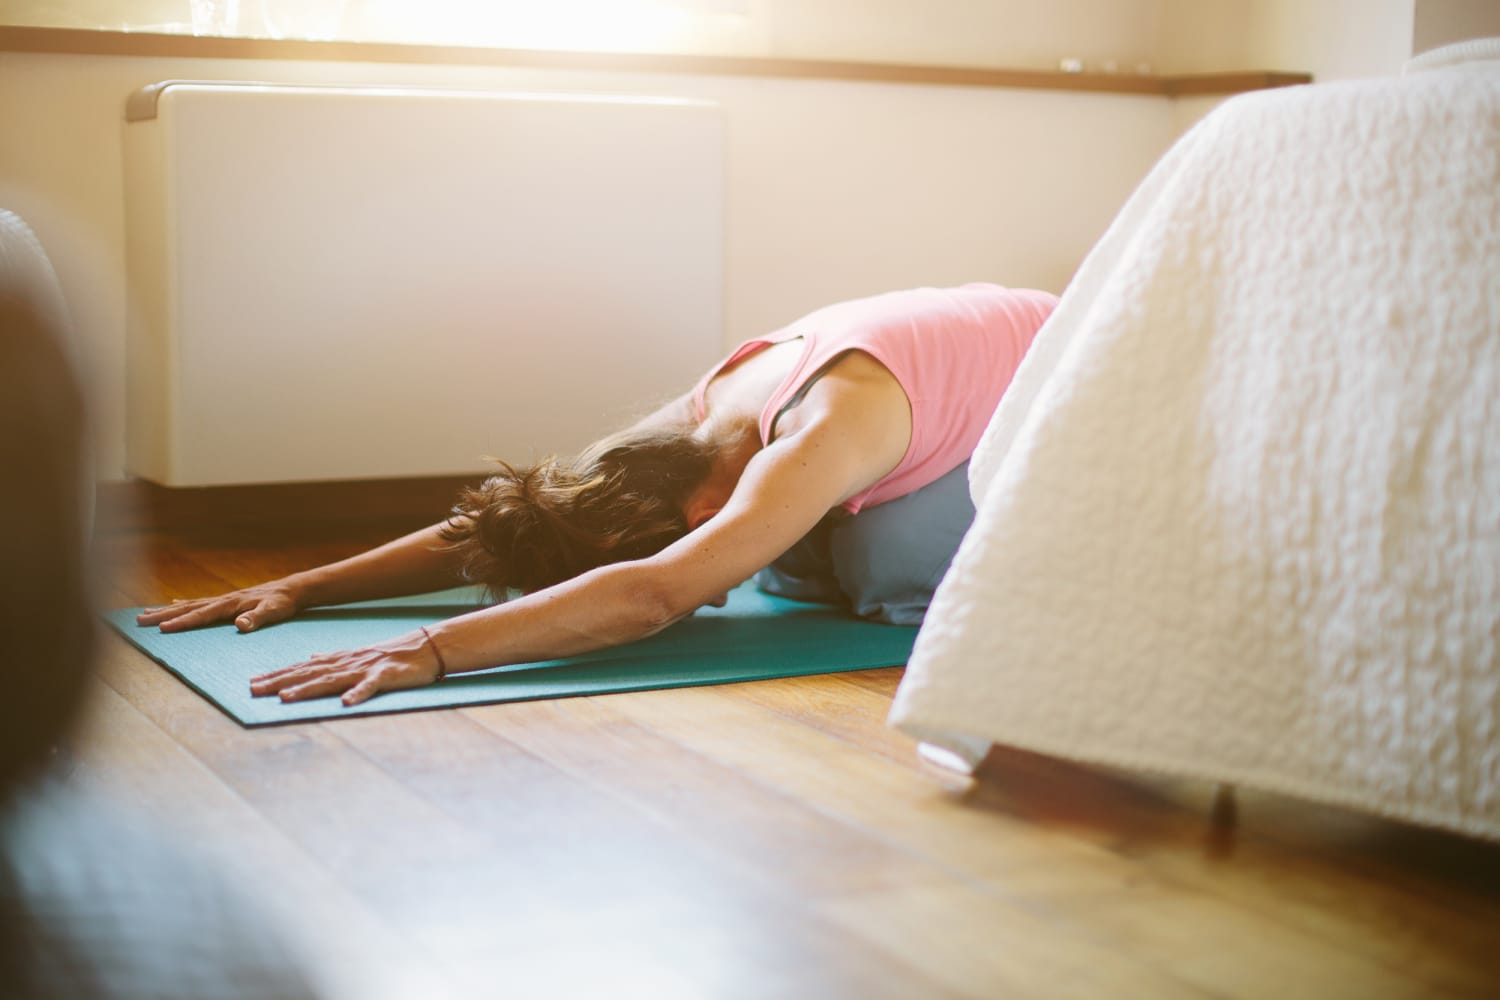 6 Simple Yoga Poses That Relieve Muscle Tension